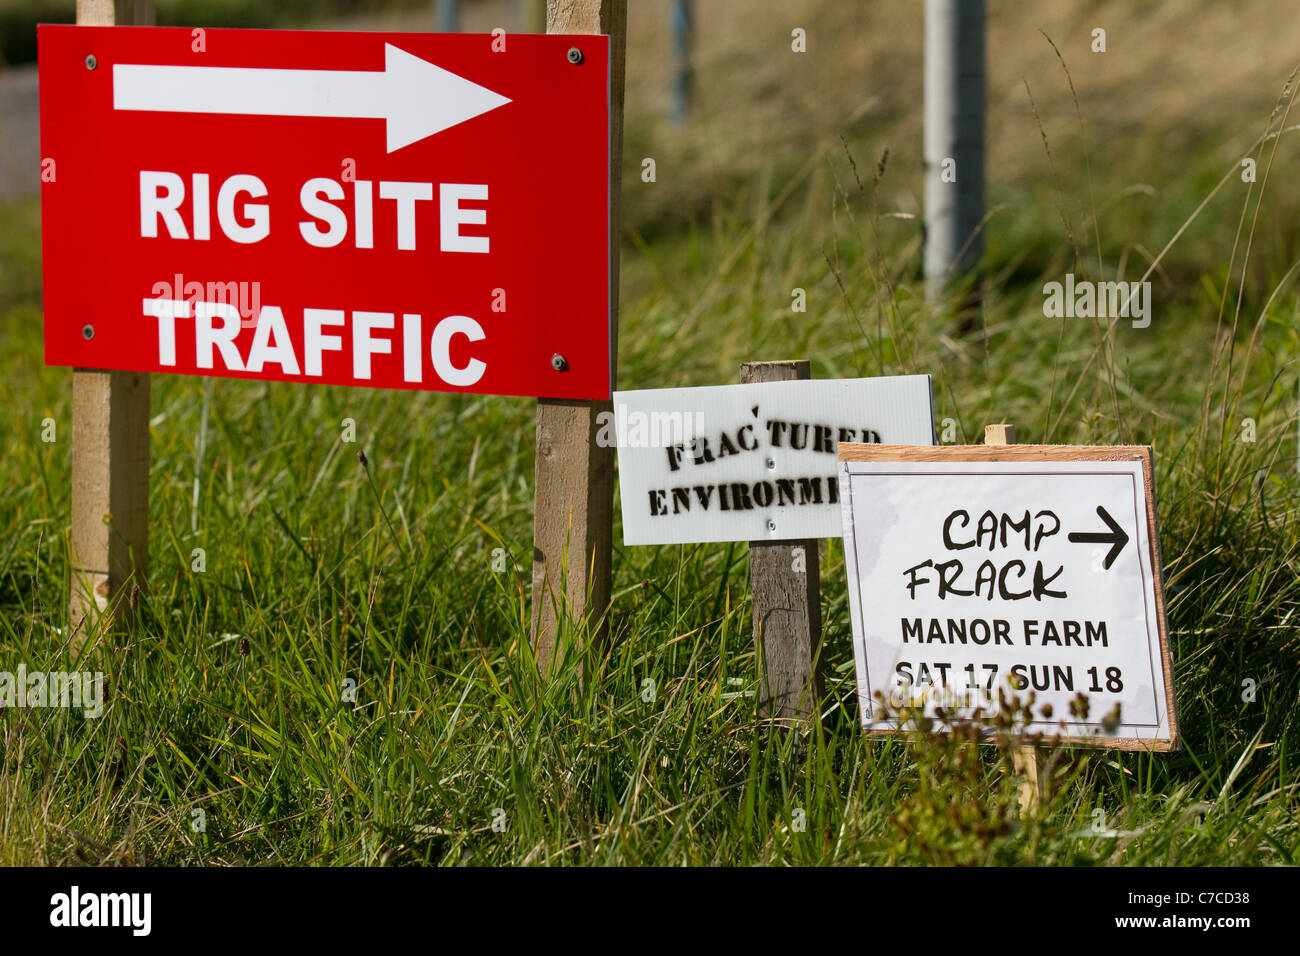 Camp Frack at Manor Farm; Rif Site traffic sign; Camp Frack_Protest Encampment & March against Hydraulic Water Fracturing & Shale-gas production at Becconsall, Banks, Southport. Stock Photo